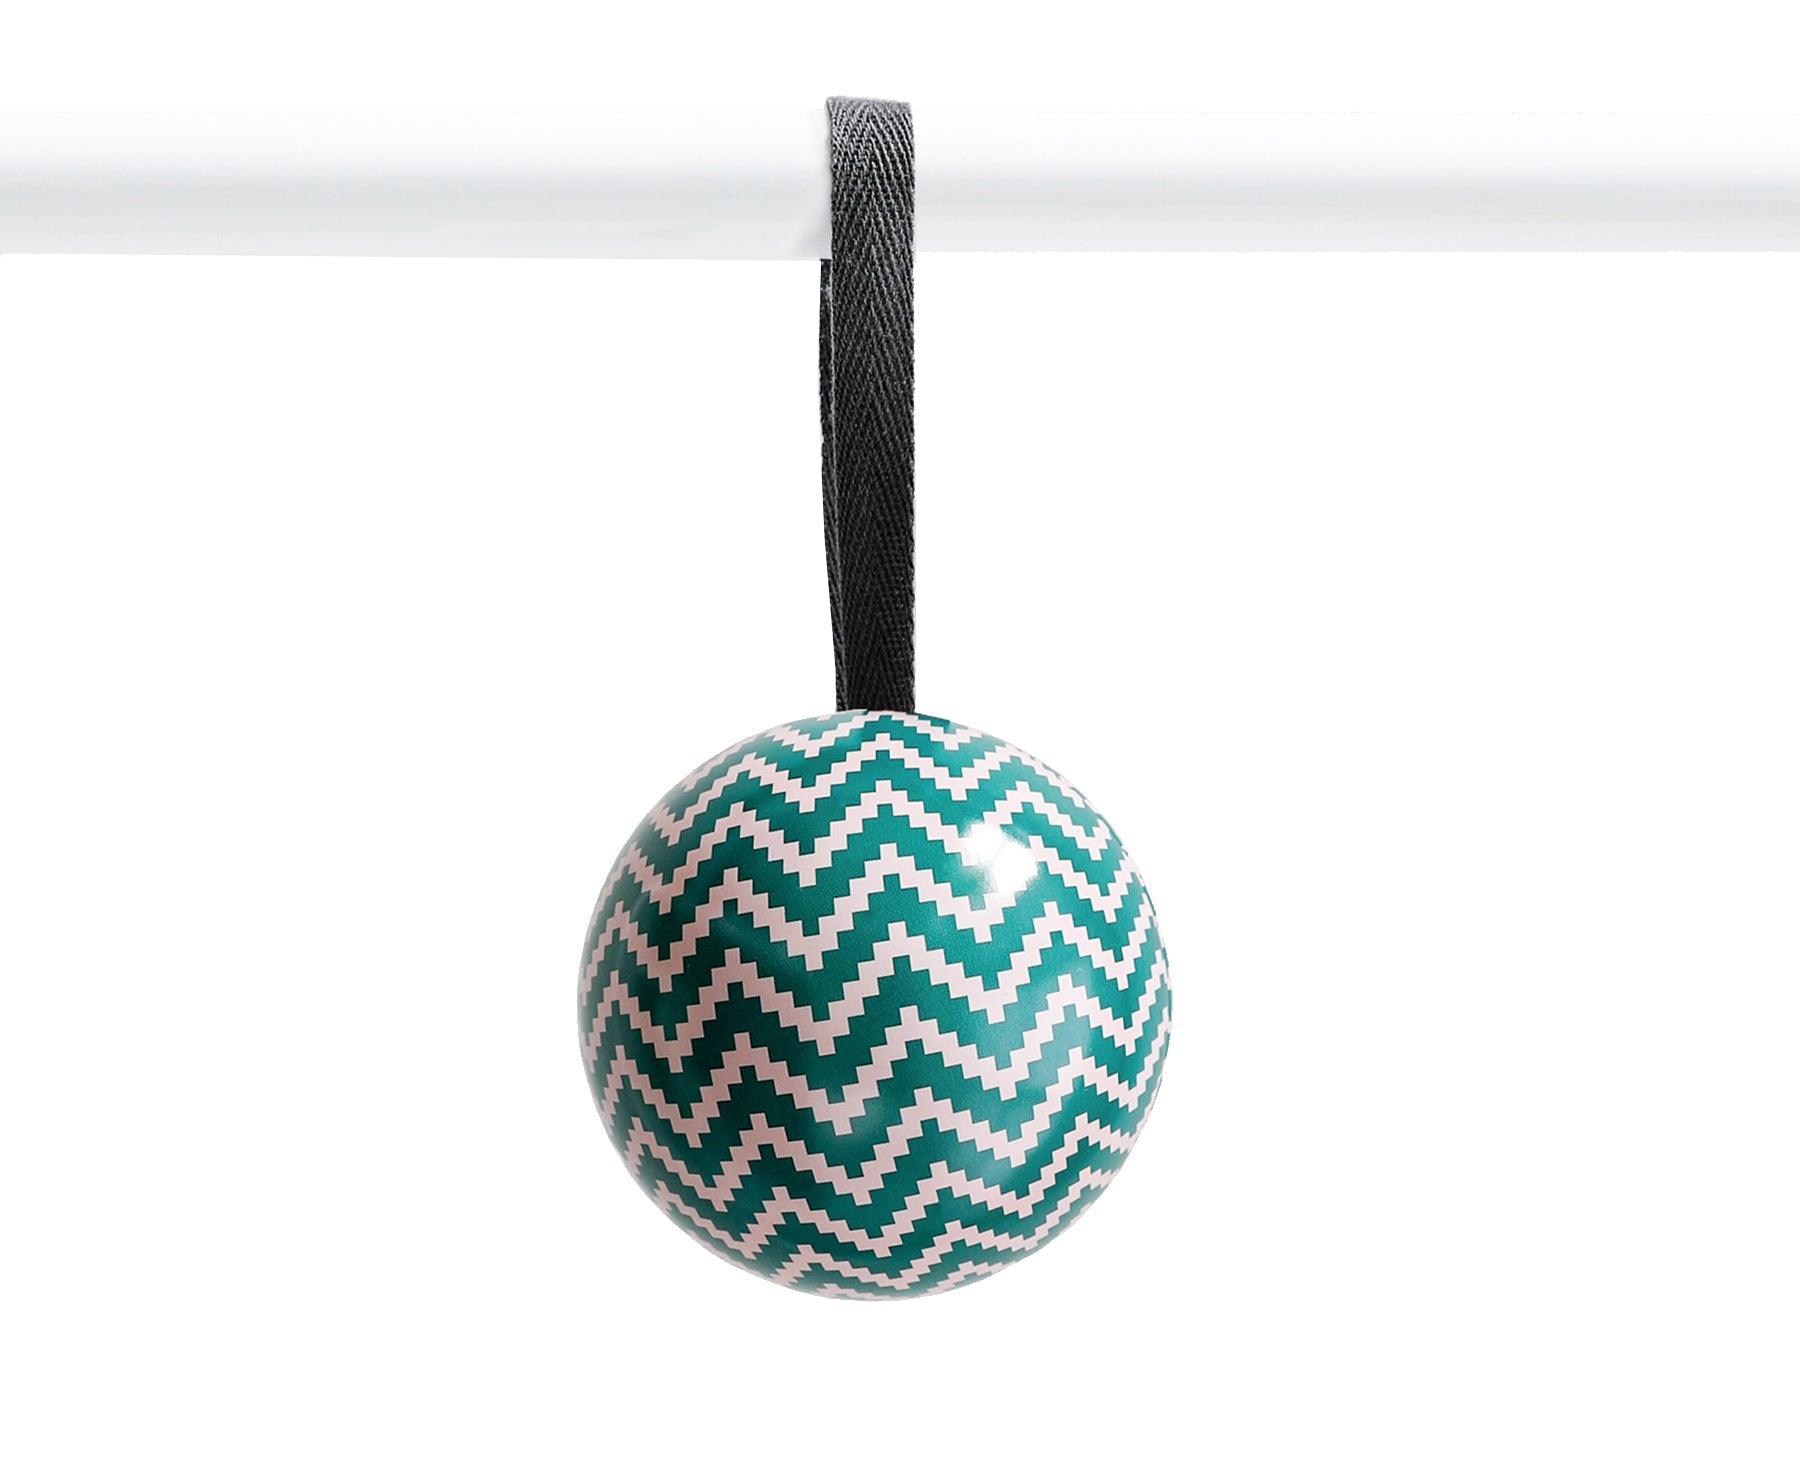 Tin Bauble - Green and White Zig Zag - by Father Rabbit